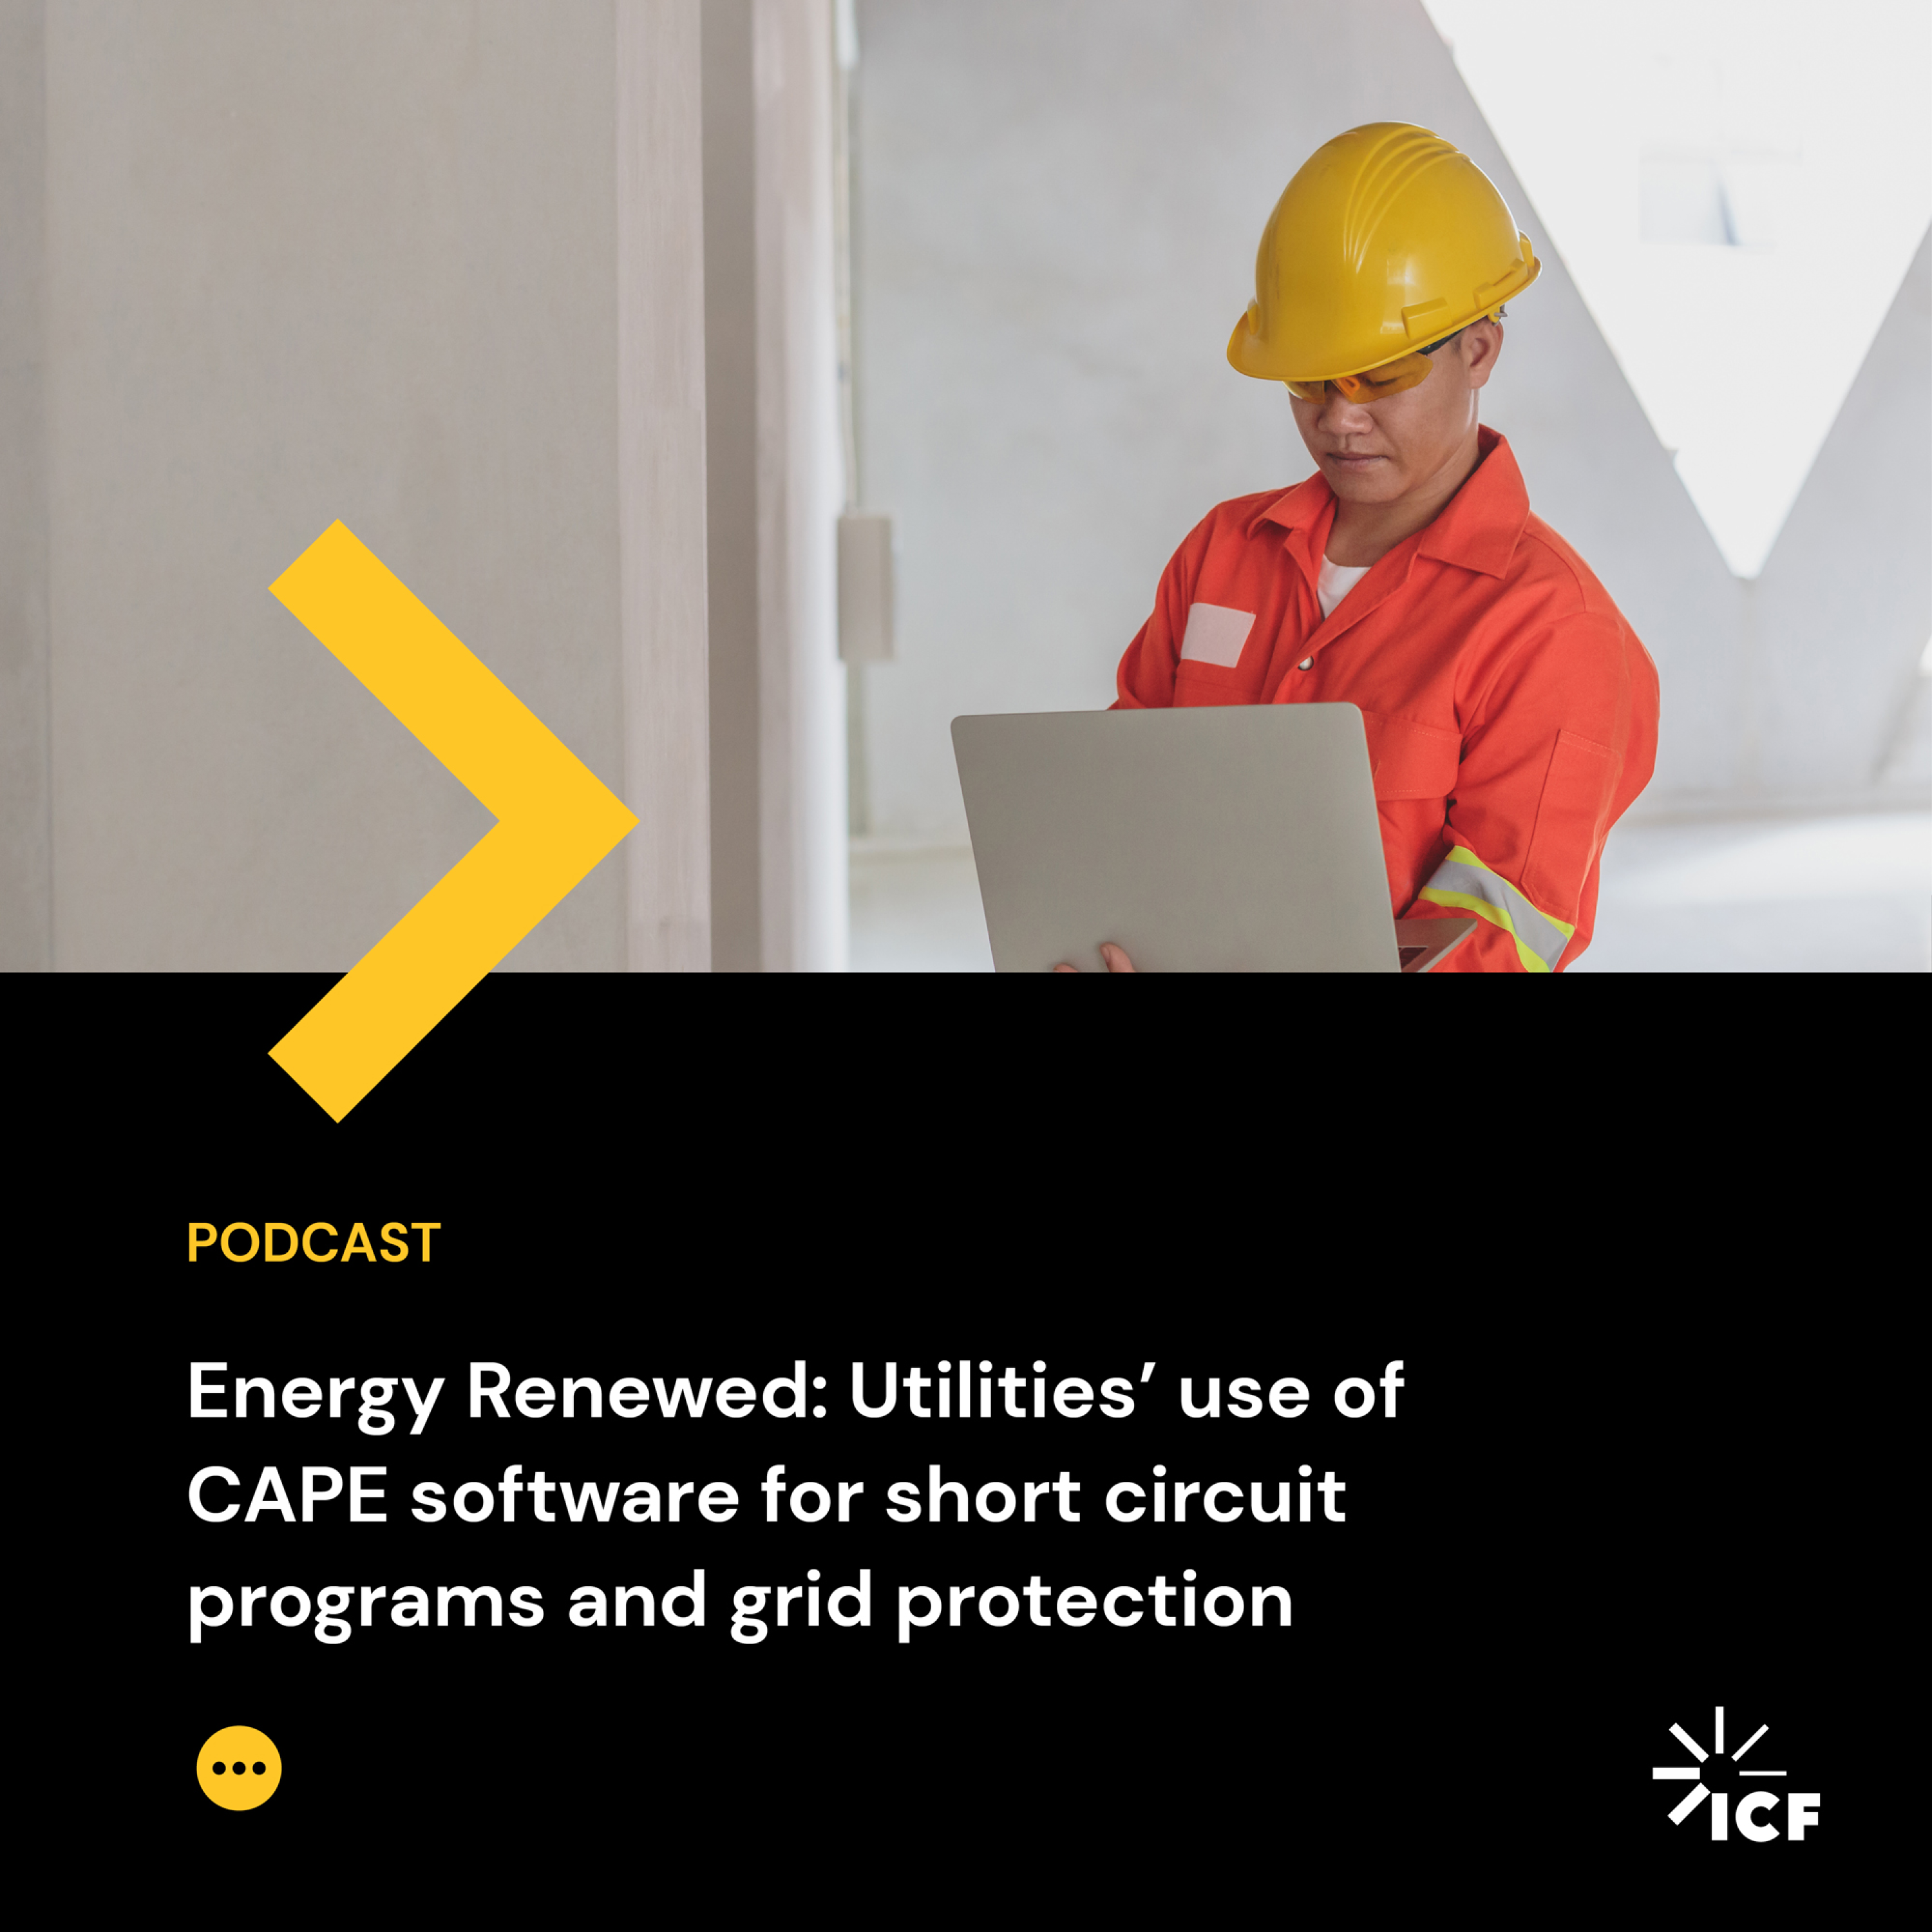 Energy Renewed #4: Utilities’ use of CAPE software for short circuit programs and grid protection